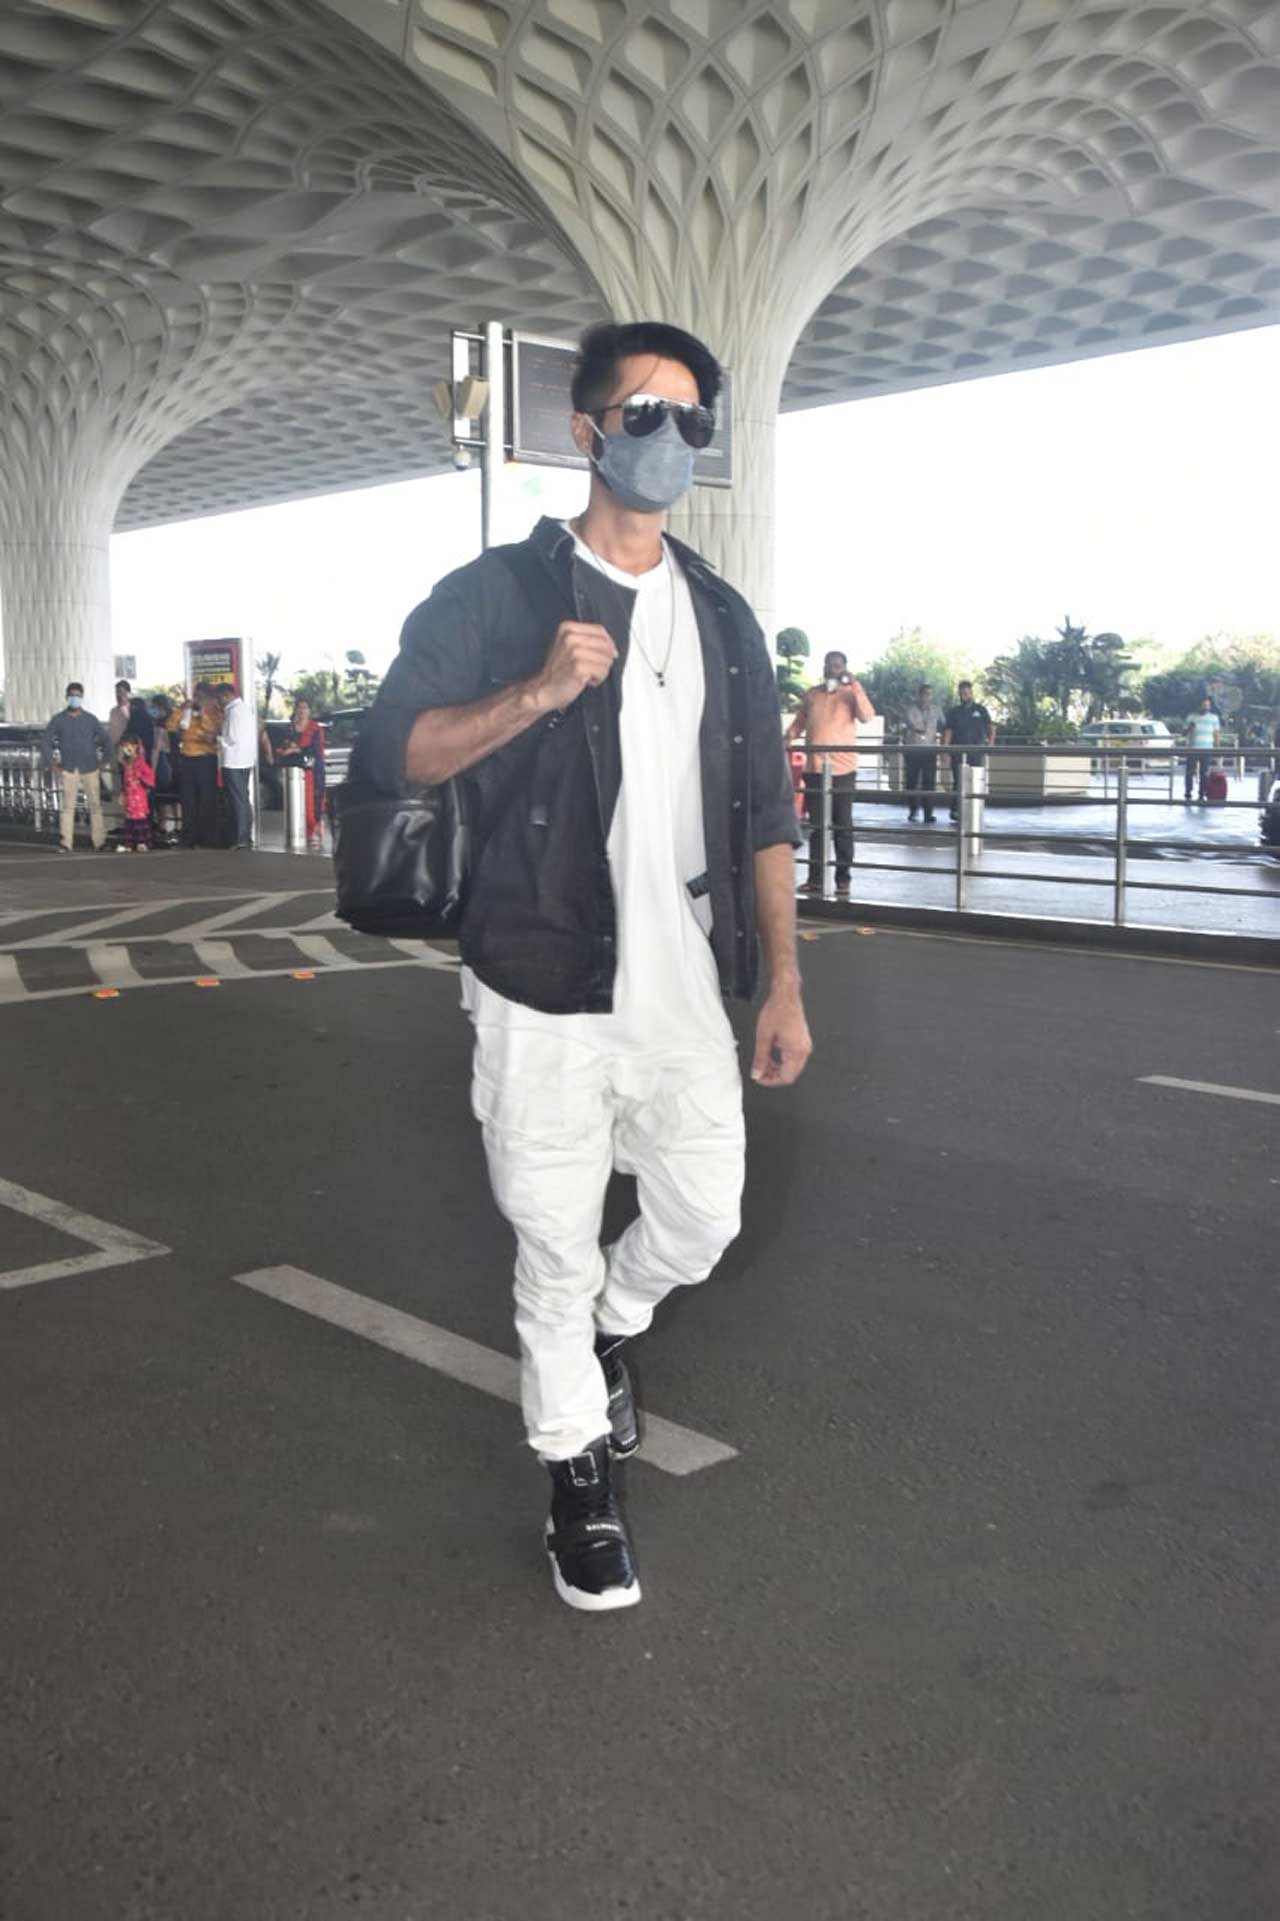 Shahid Kapoor, who is currently juggling a few projects, was also snapped at the Mumbai airport. Shahid recently announced the release date of his film 'Jersey' on social media. The film will release on December 31, 2021.